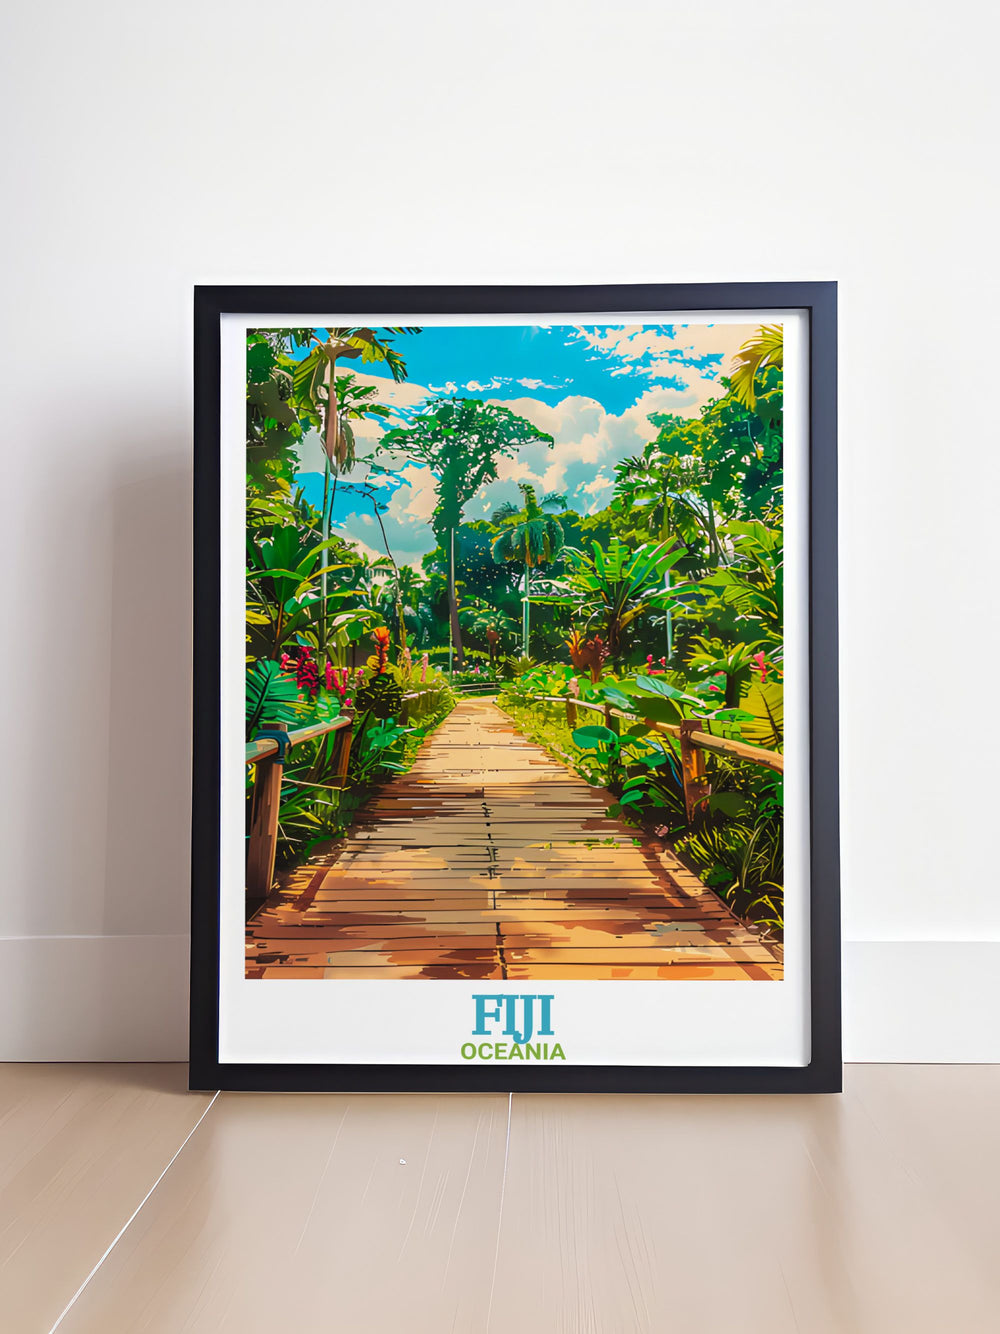 Stunning Fiji wall art featuring Garden of the Sleeping Giant brings the serene landscapes and vibrant flora of Fiji into your home decor. This Fiji photo beautifully captures the natural beauty of the Garden of the Sleeping Giant.